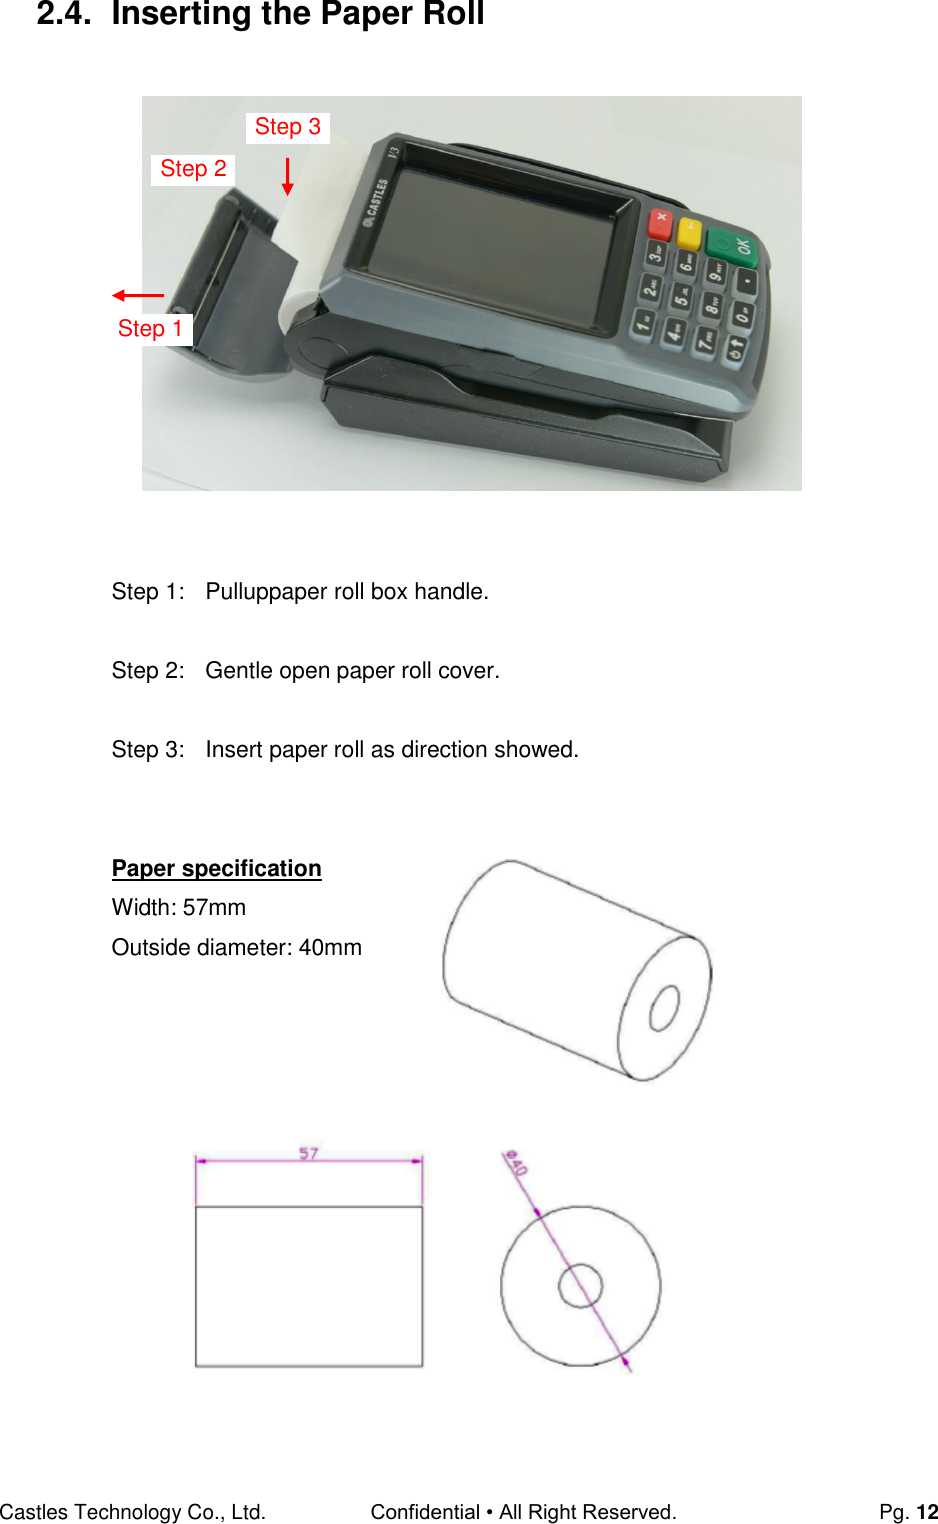 Castles Technology Co., Ltd. Confidential • All Right Reserved.  Pg. 12 2.4.  Inserting the Paper Roll                  Step 1:  Pulluppaper roll box handle.  Step 2:  Gentle open paper roll cover.  Step 3:  Insert paper roll as direction showed.   Paper specification Width: 57mm Outside diameter: 40mm      Step 2 Step 1 Step 3 